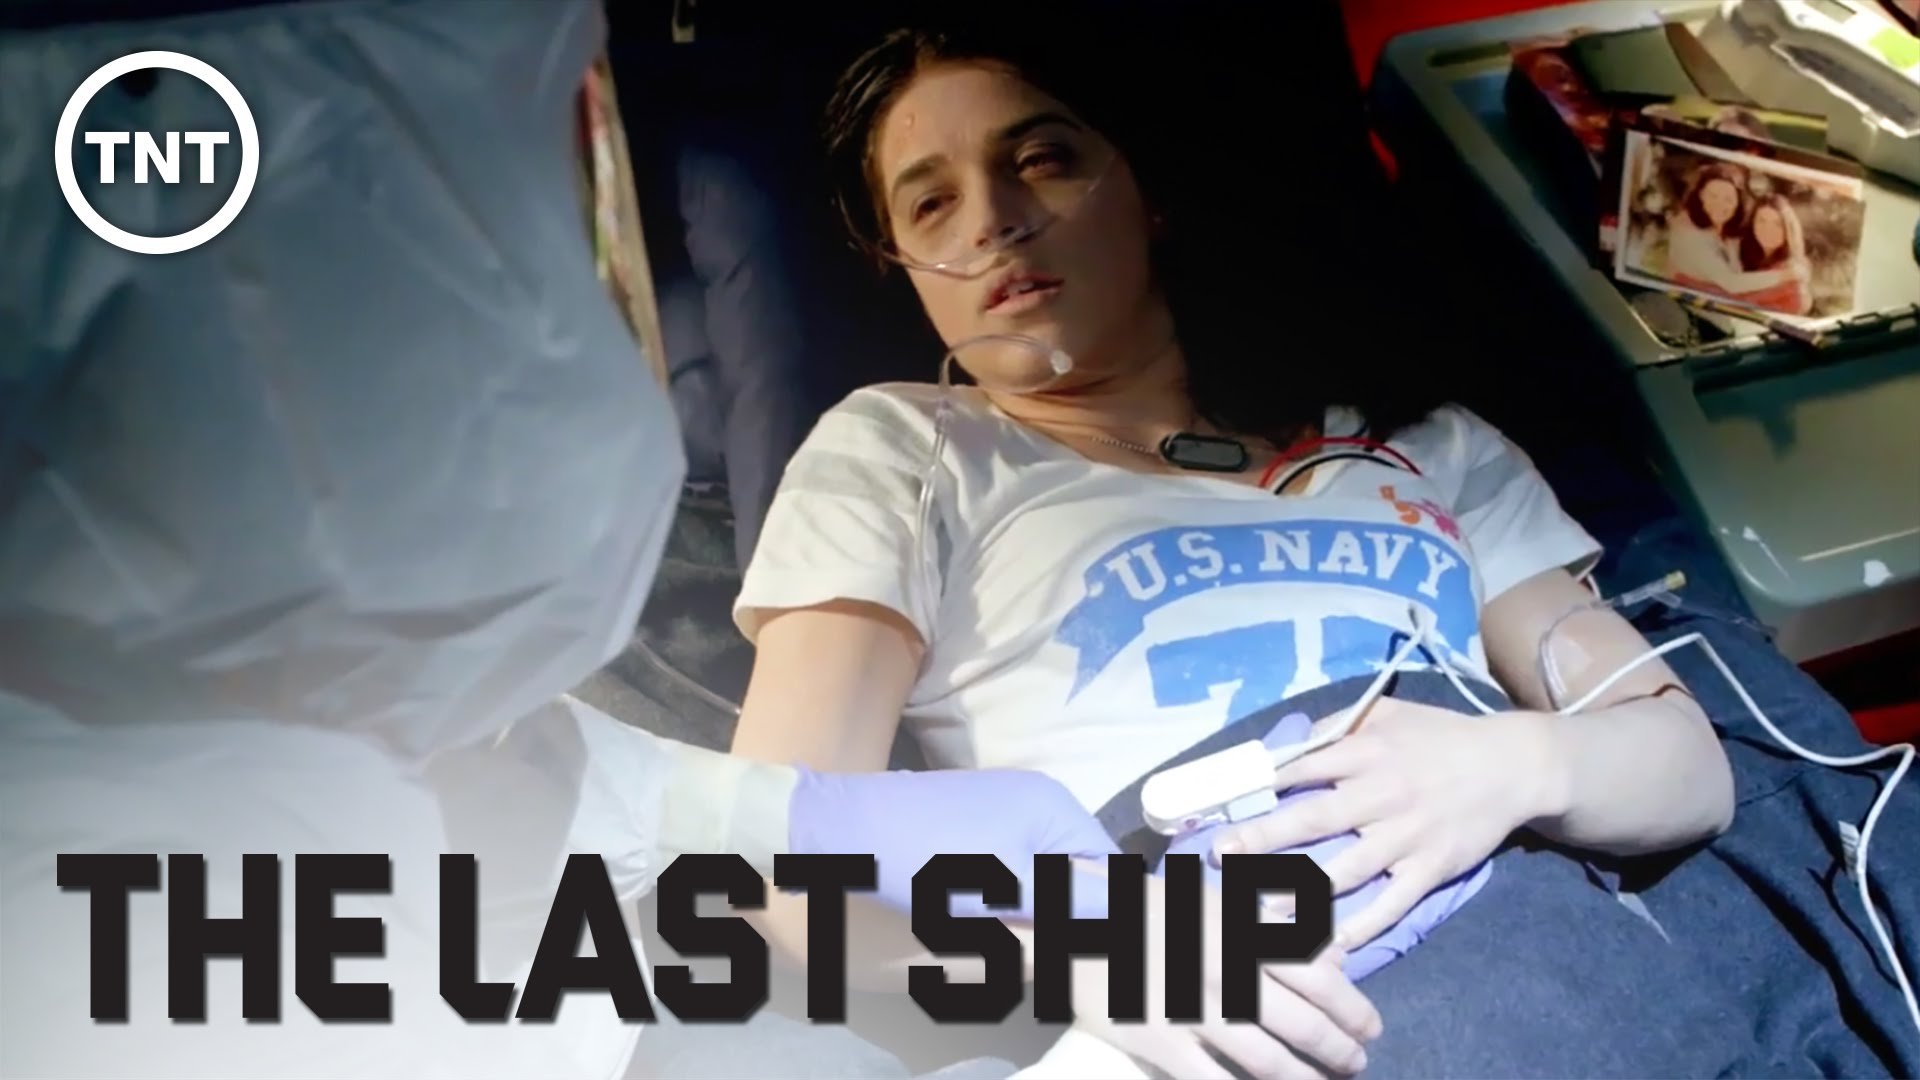 THE LAST SHIP military navy series action drama apocalyptic sci fi